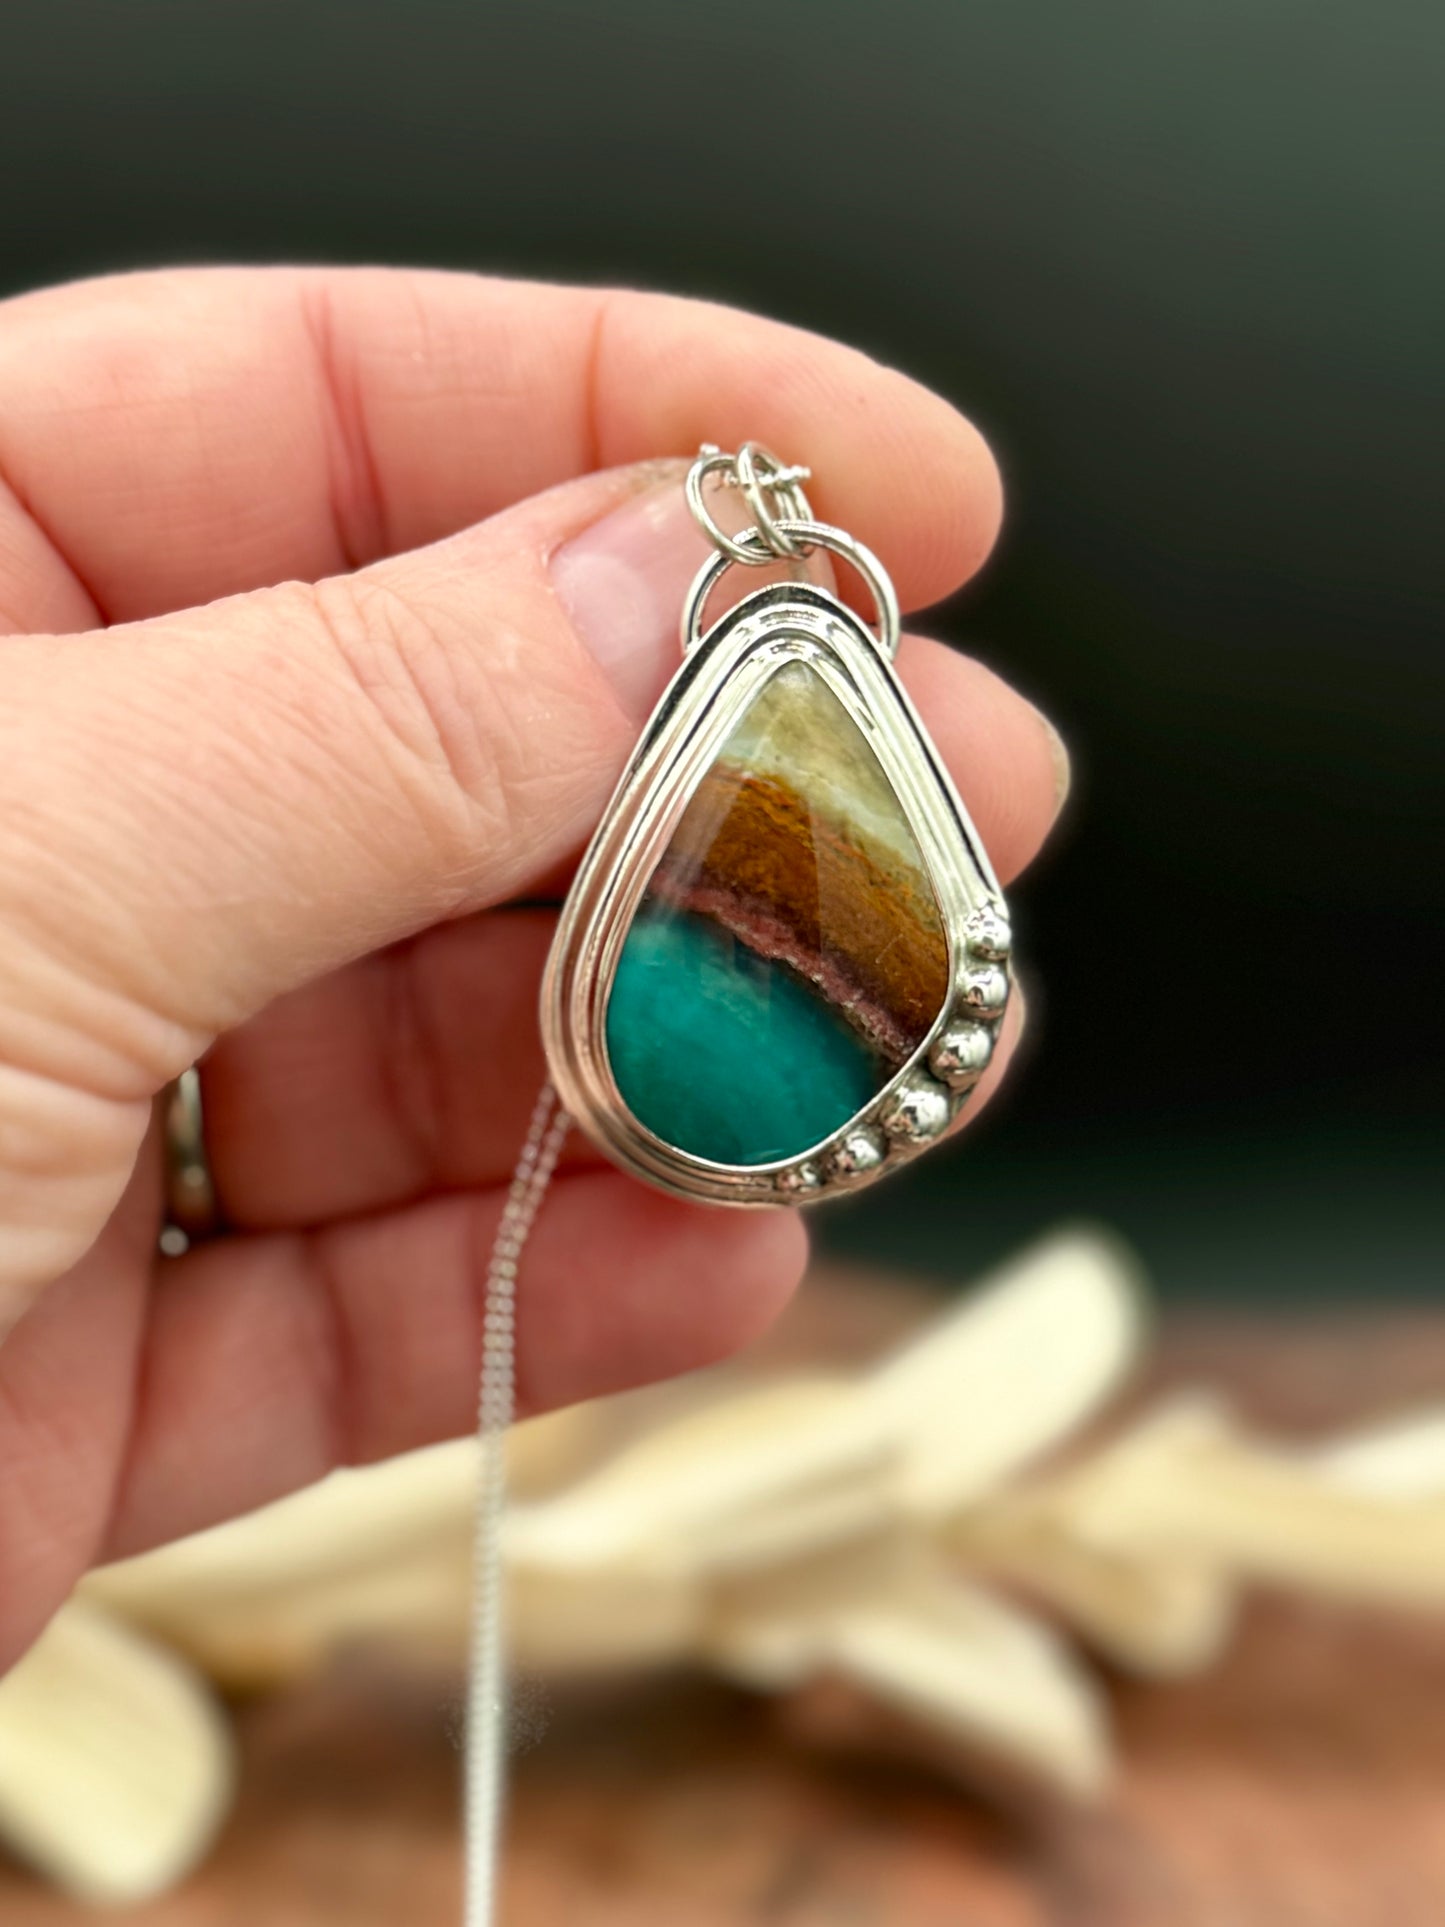 Indonesian Blue Opalized Wood Sterling Silver Pendant Necklace